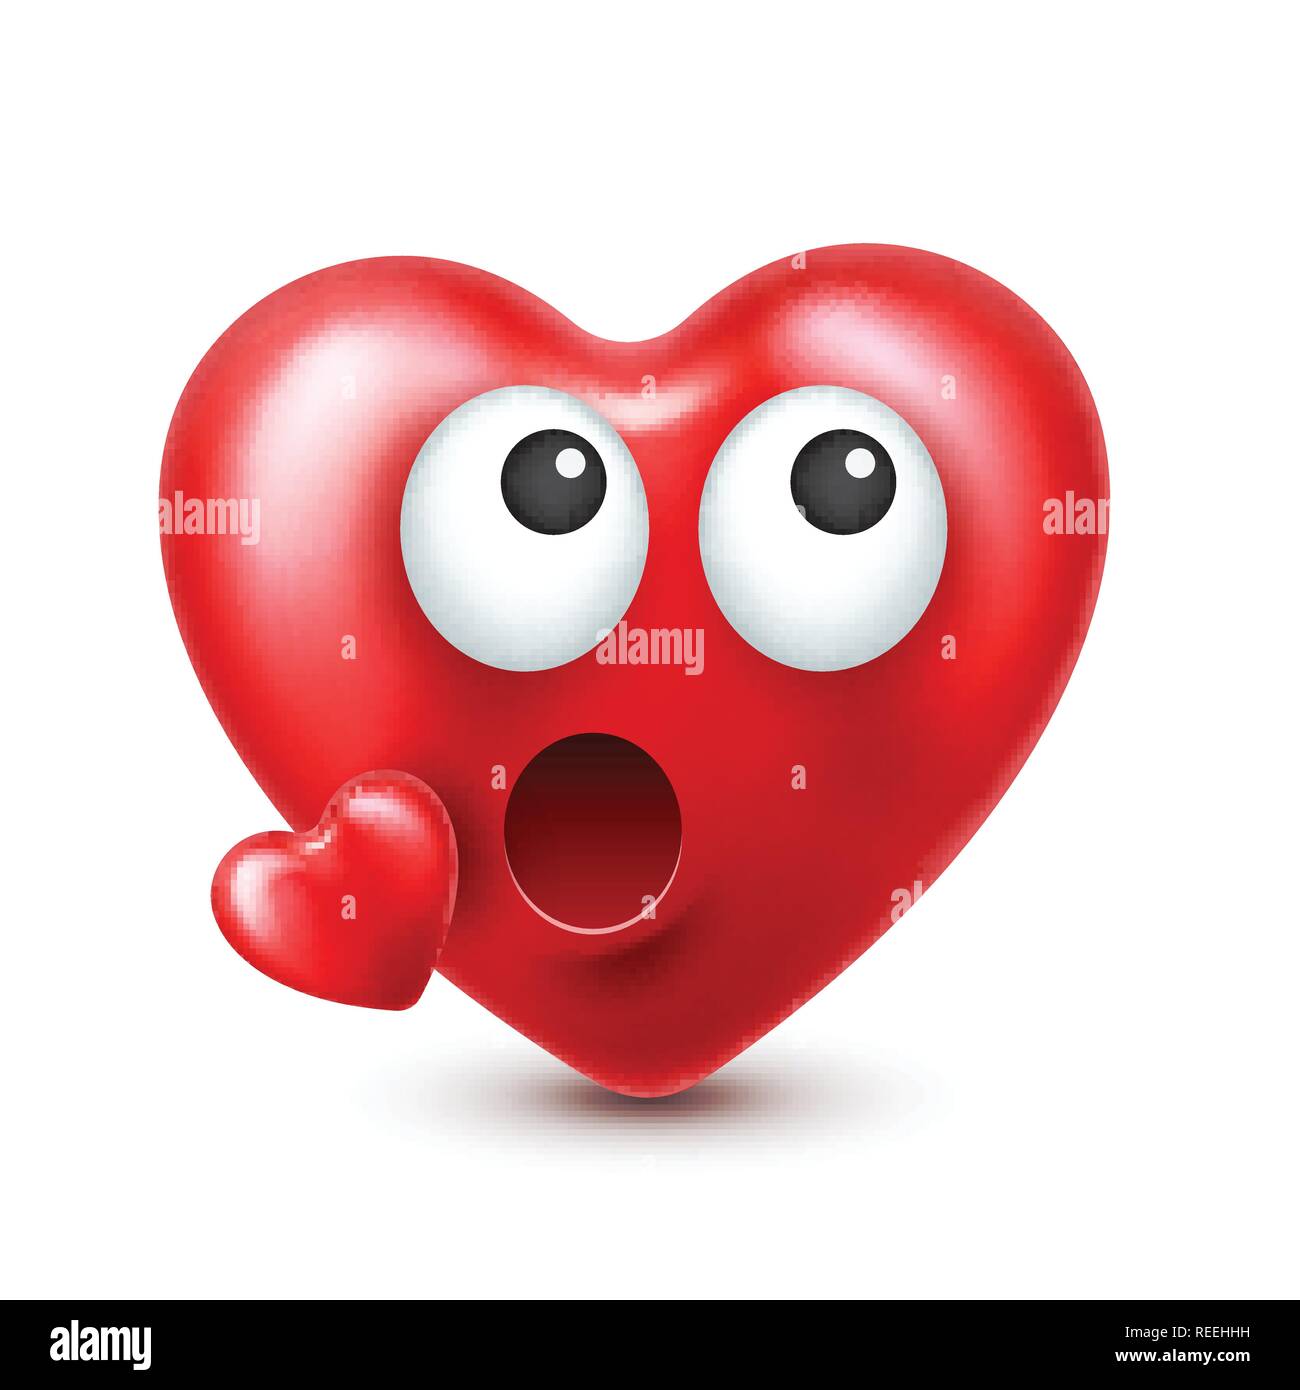 Heart smiley emoji vector for Valentines Day. Funny red face with ...